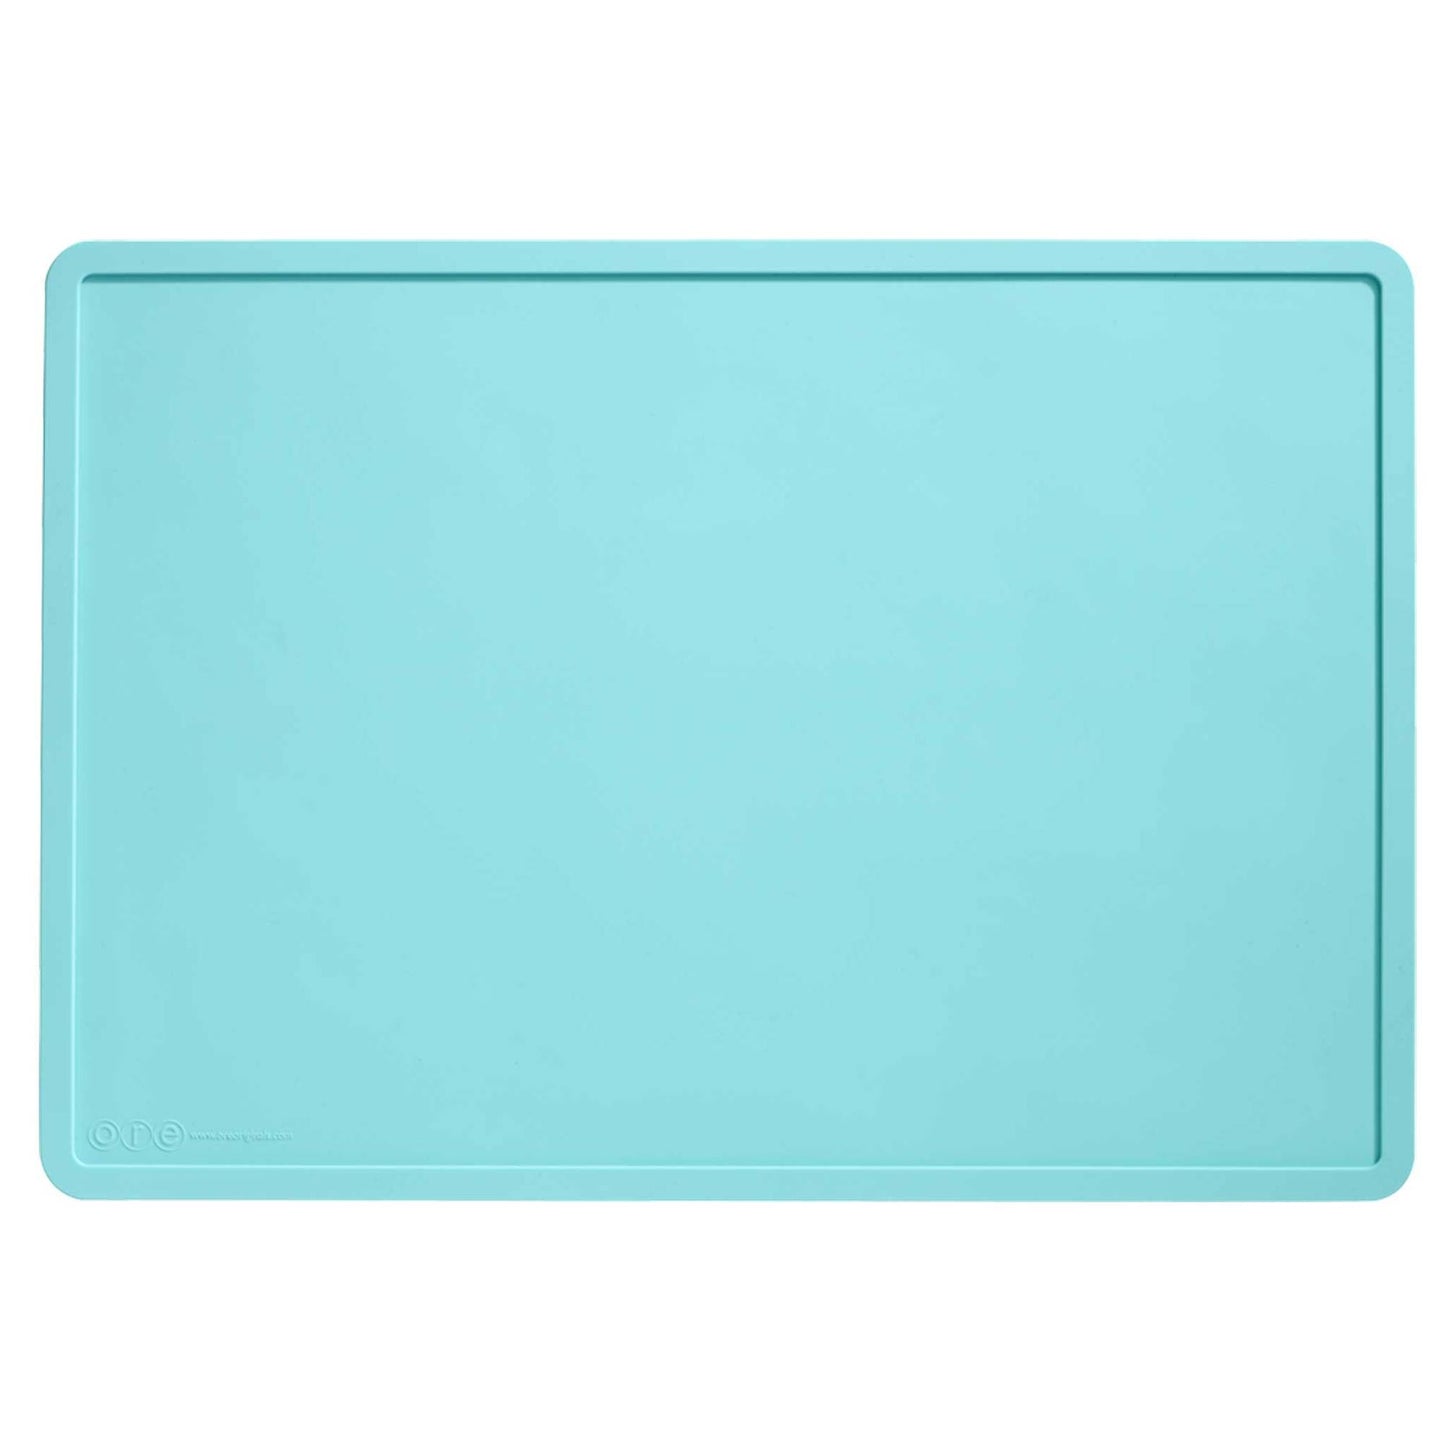 Silicone Placemats Teal Image